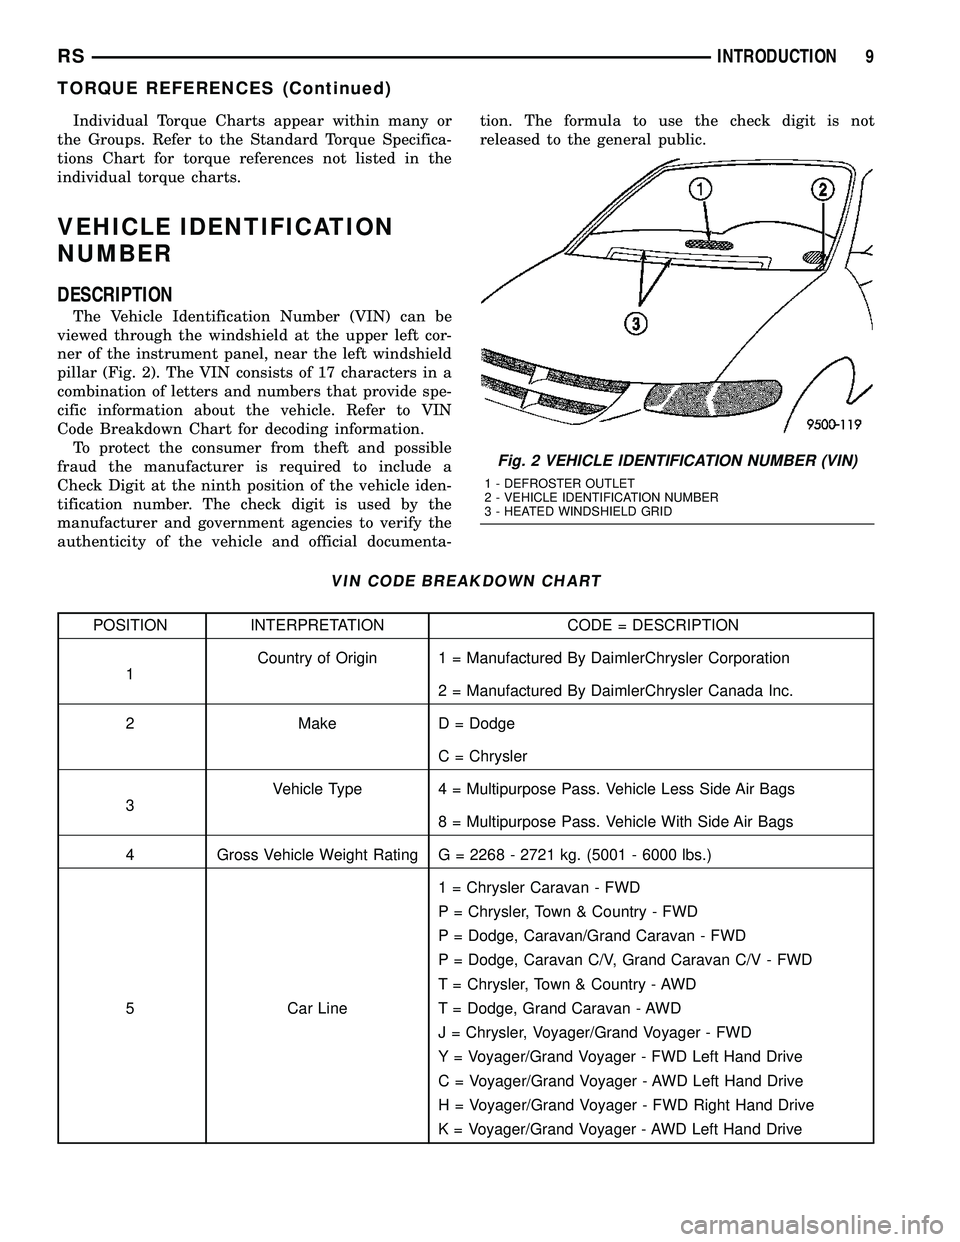 CHRYSLER CARAVAN 2005  Service Manual Individual Torque Charts appear within many or
the Groups. Refer to the Standard Torque Specifica-
tions Chart for torque references not listed in the
individual torque charts.
VEHICLE IDENTIFICATION
